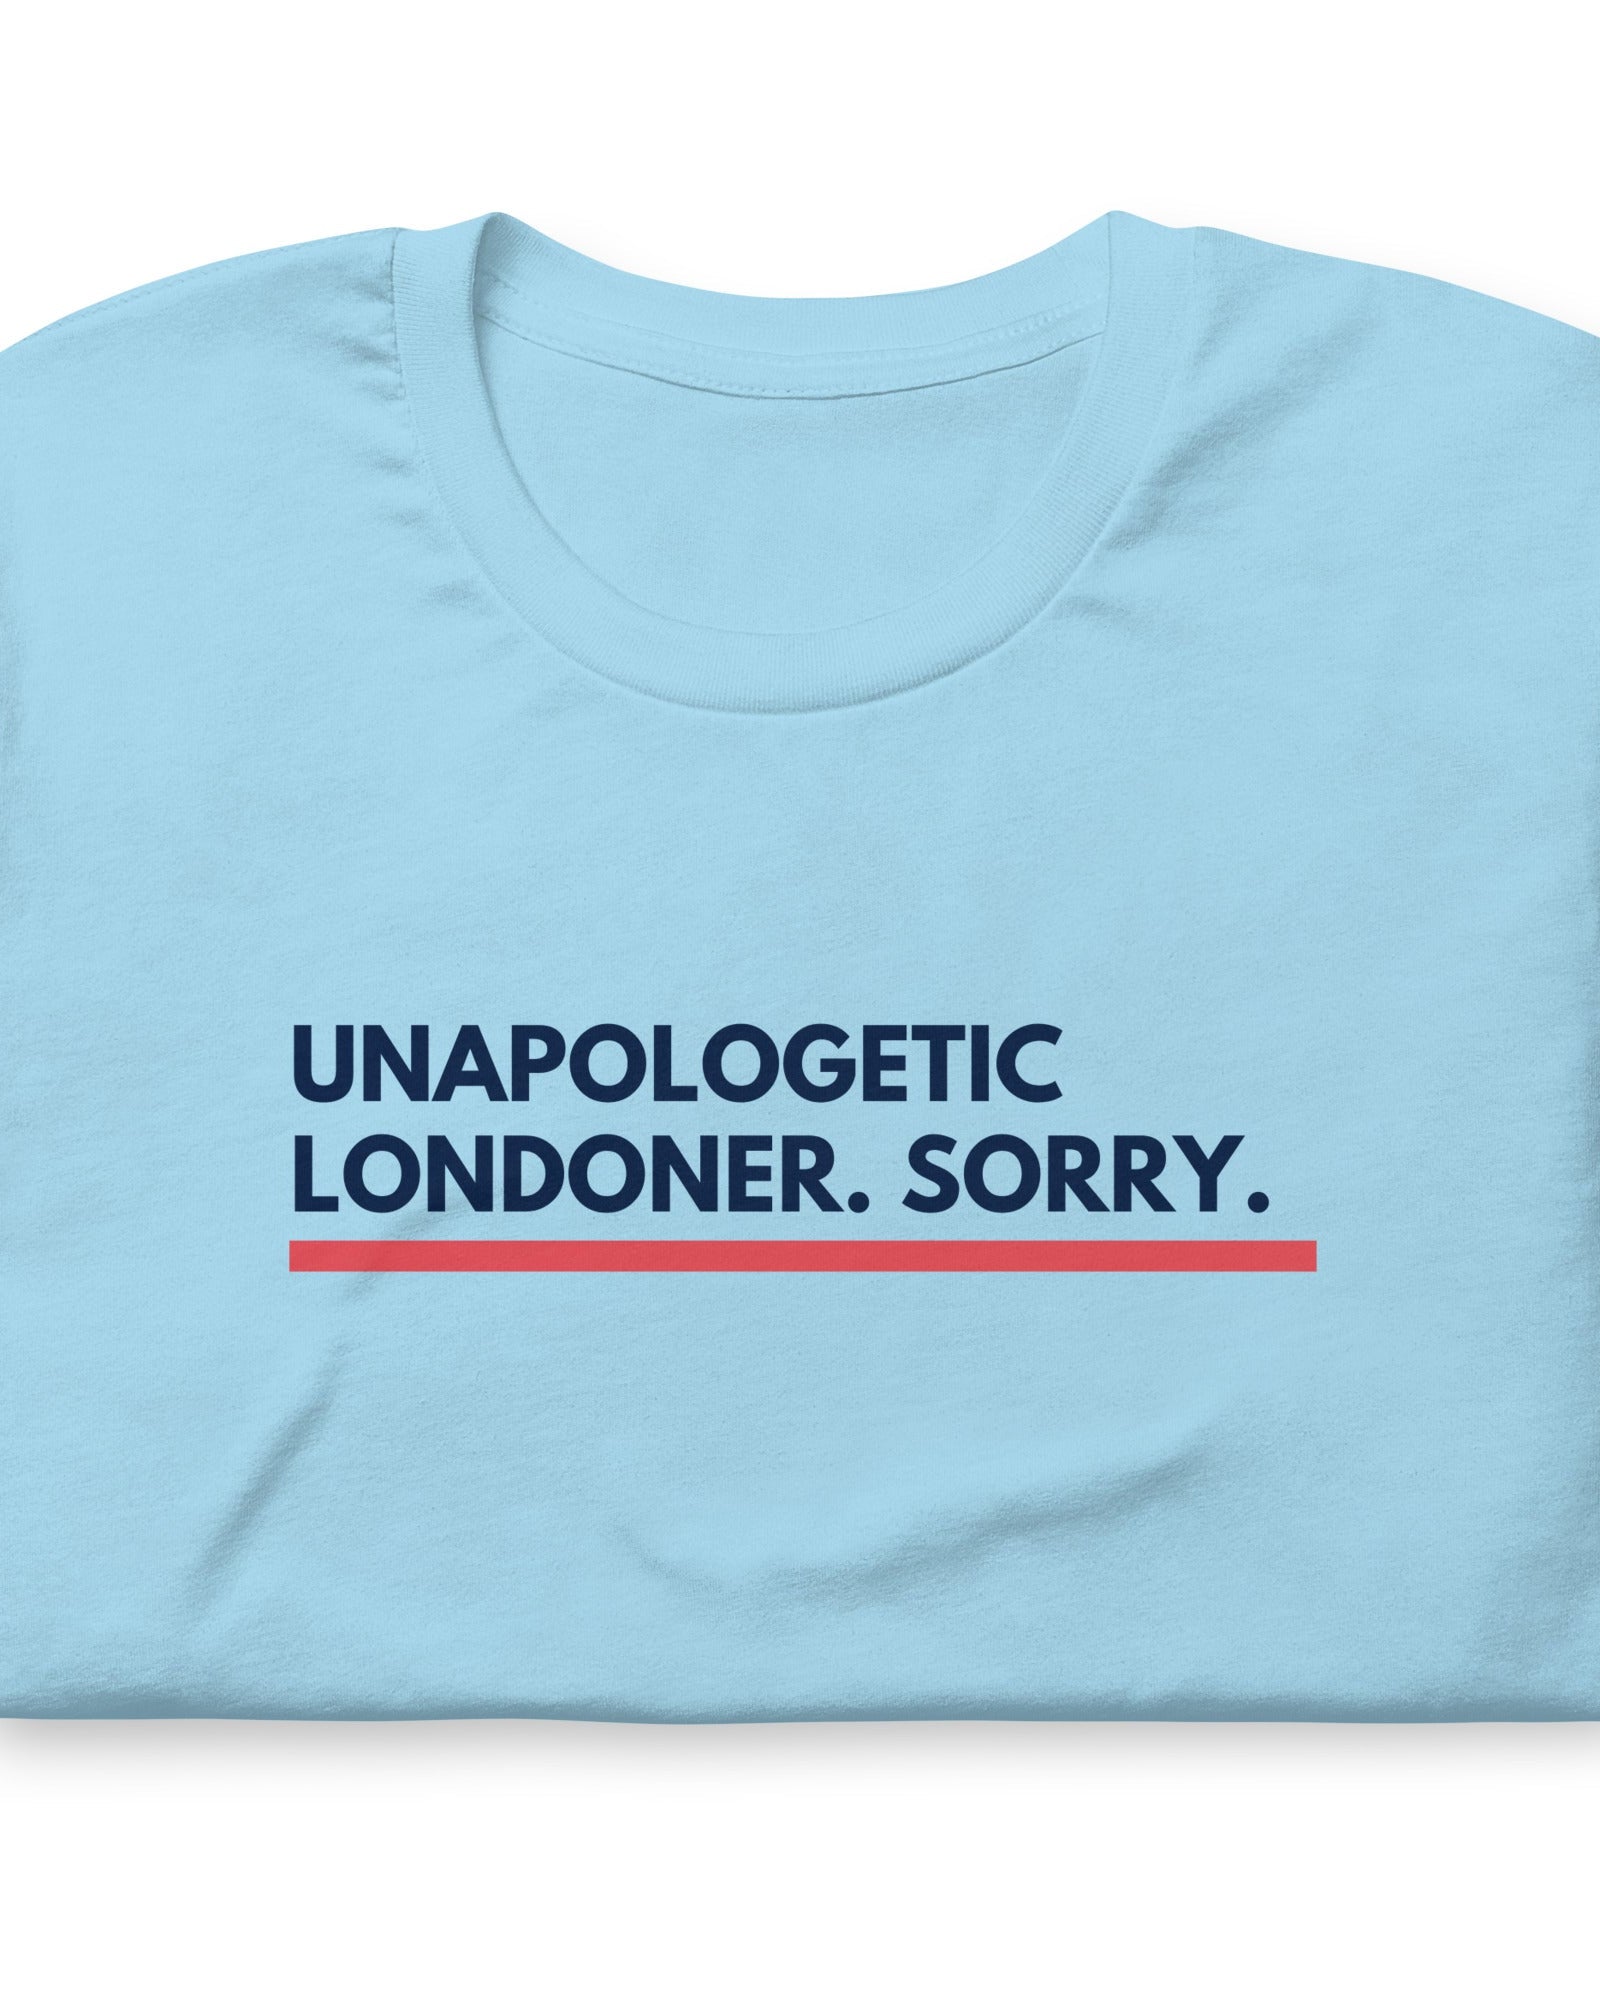 Unapologetic Londoner Sorry T-shirt Ocean Blue / S Shirts & Tops Jolly & Goode